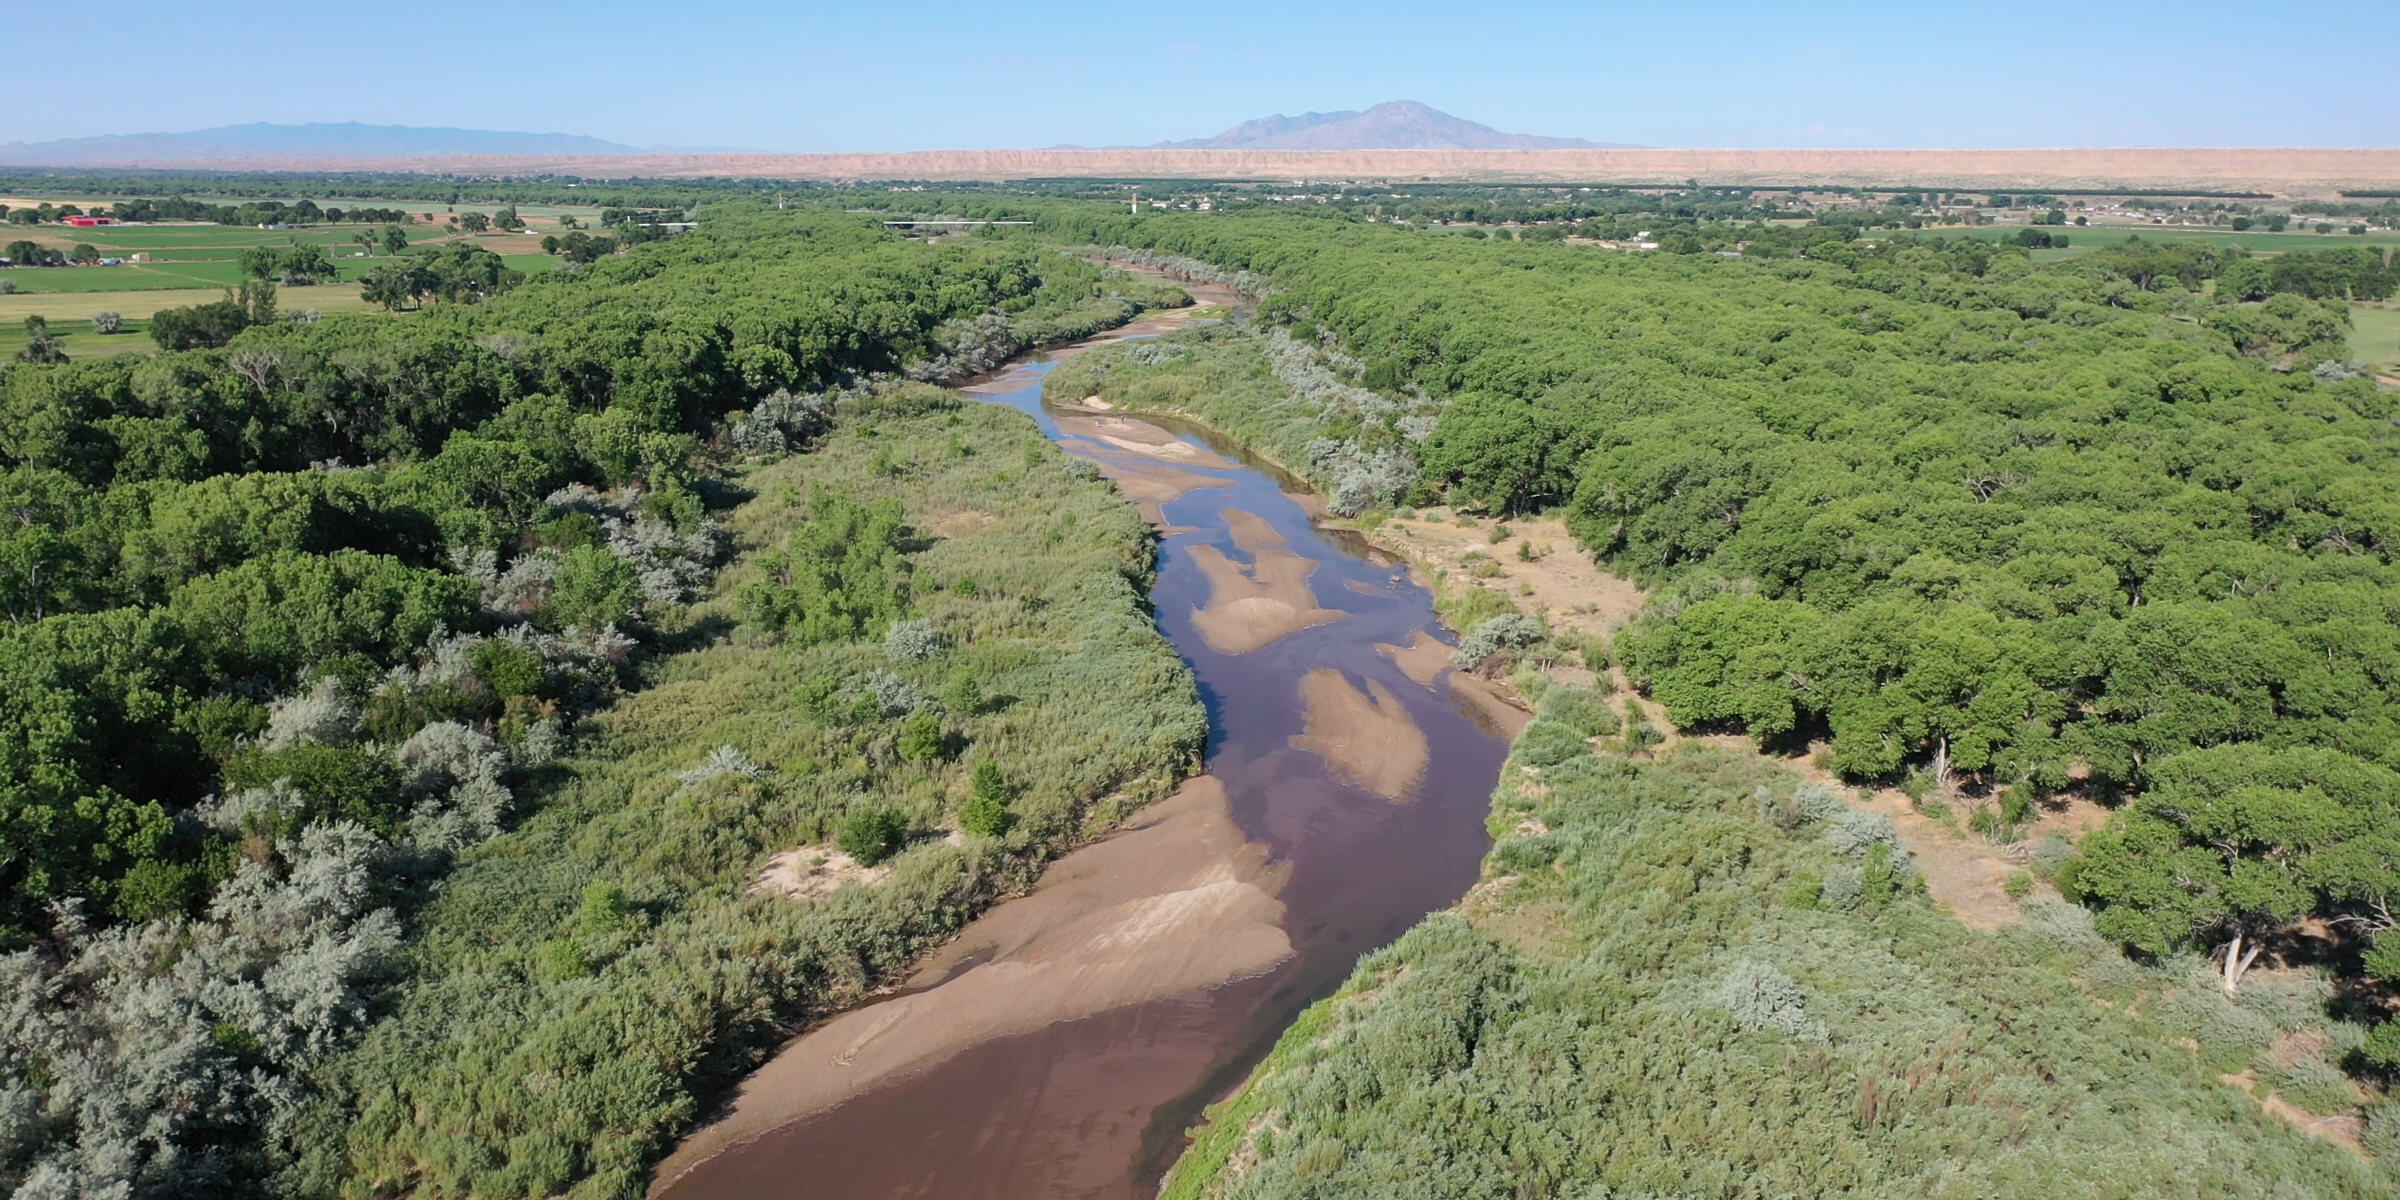 A stretch of the Rio Grande in New Mexico, a shallow but wide meandering river lined with lush vegetation.